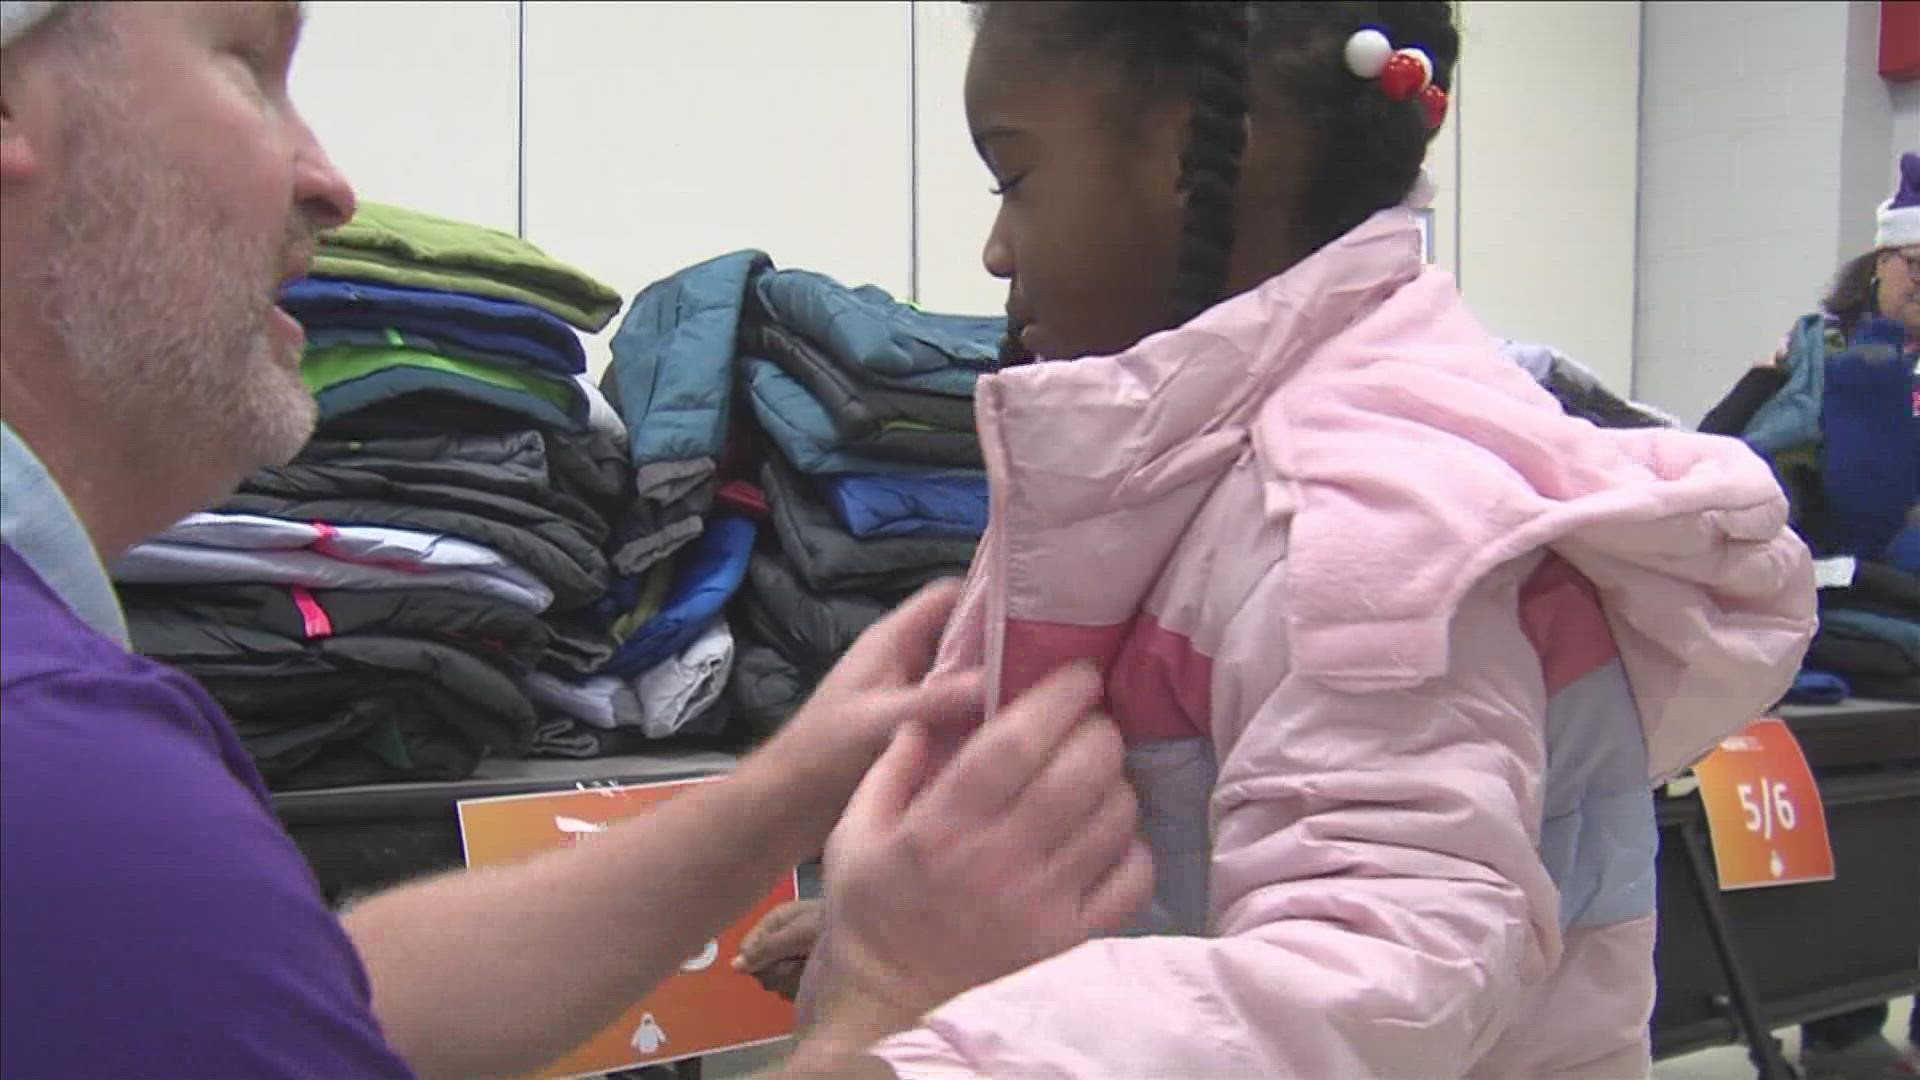 FedEx Cares volunteers gave 560 new winter coats to kids who need them Thursday at Fox Meadows Elementary.